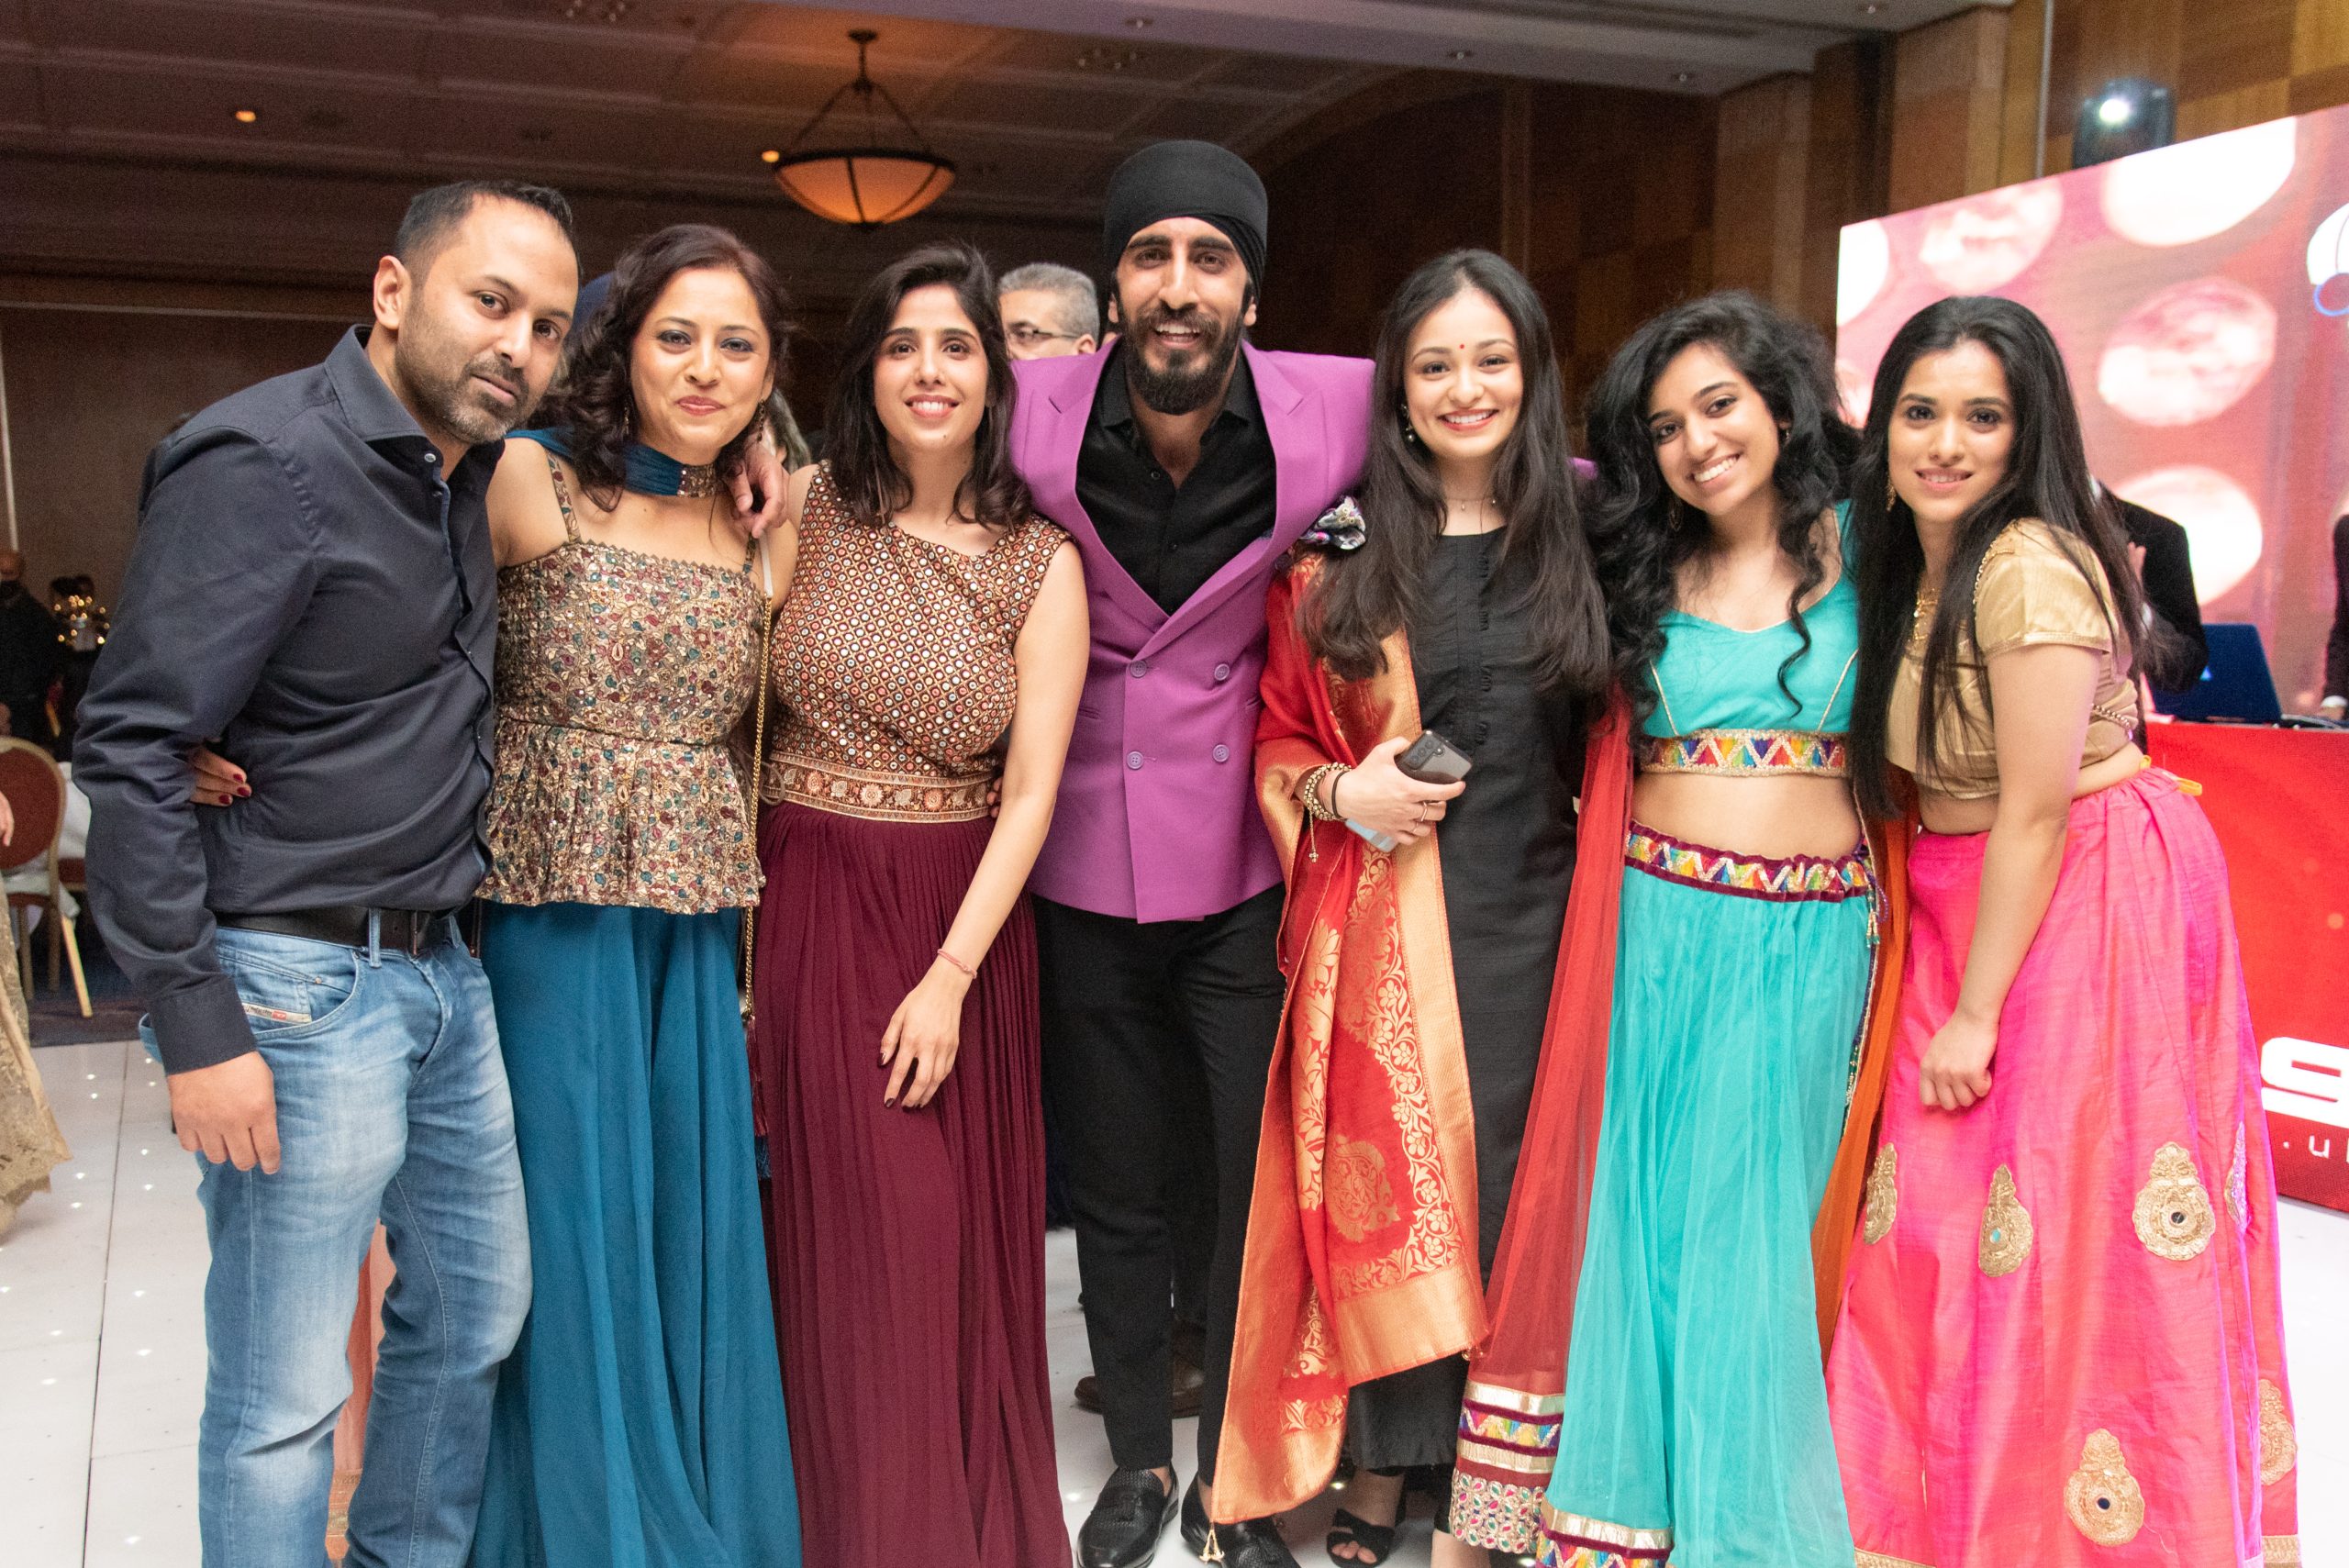 With the Bollywood Dentist's newest event on the horizon, the Dil Se Ball, Chetan Sharma tells us what the evening will entail.